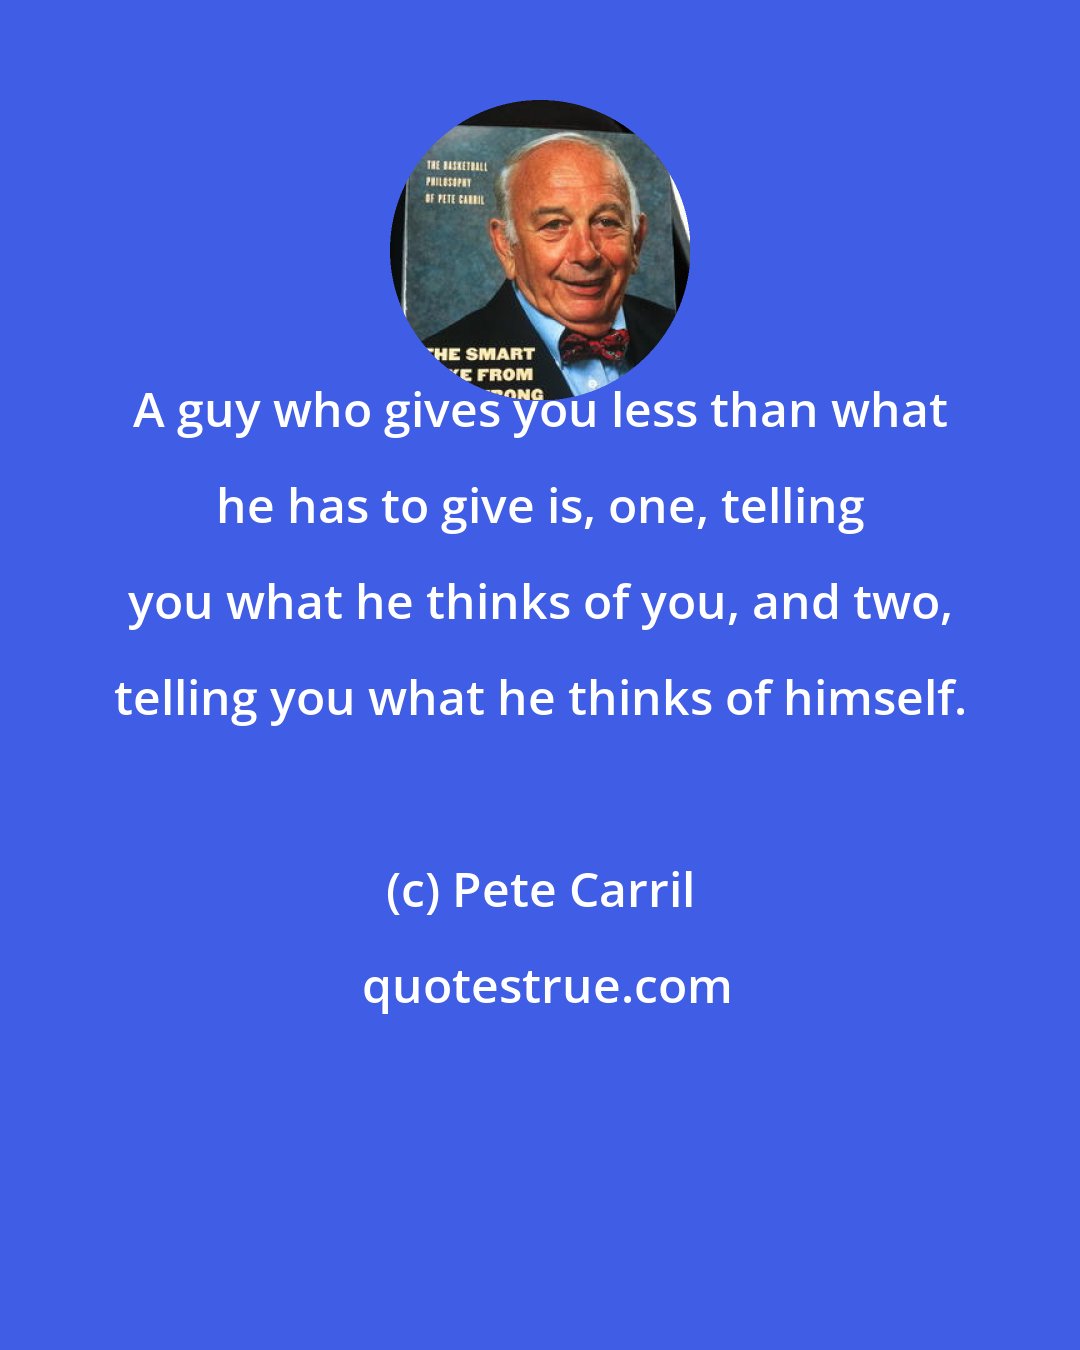 Pete Carril: A guy who gives you less than what he has to give is, one, telling you what he thinks of you, and two, telling you what he thinks of himself.